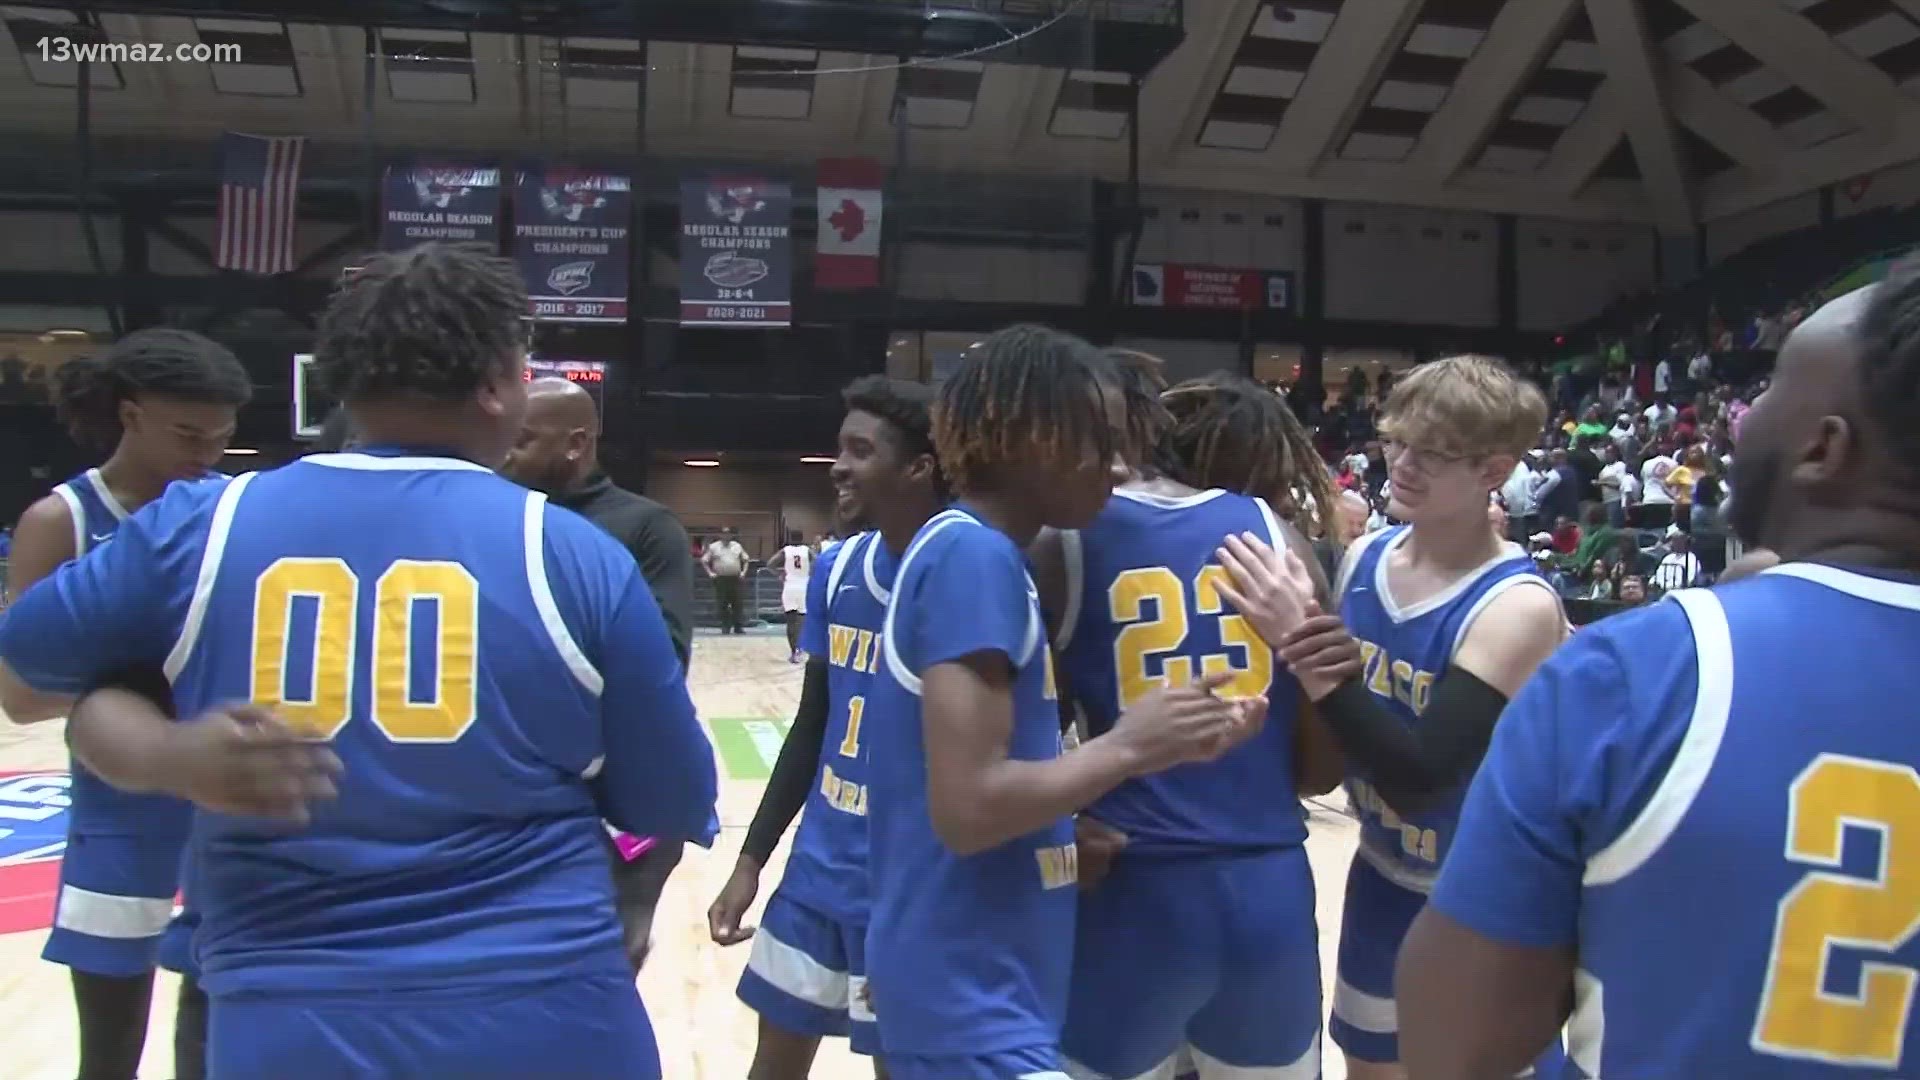 The Warriors grabbed the win on the biggest stage to take home another state title.